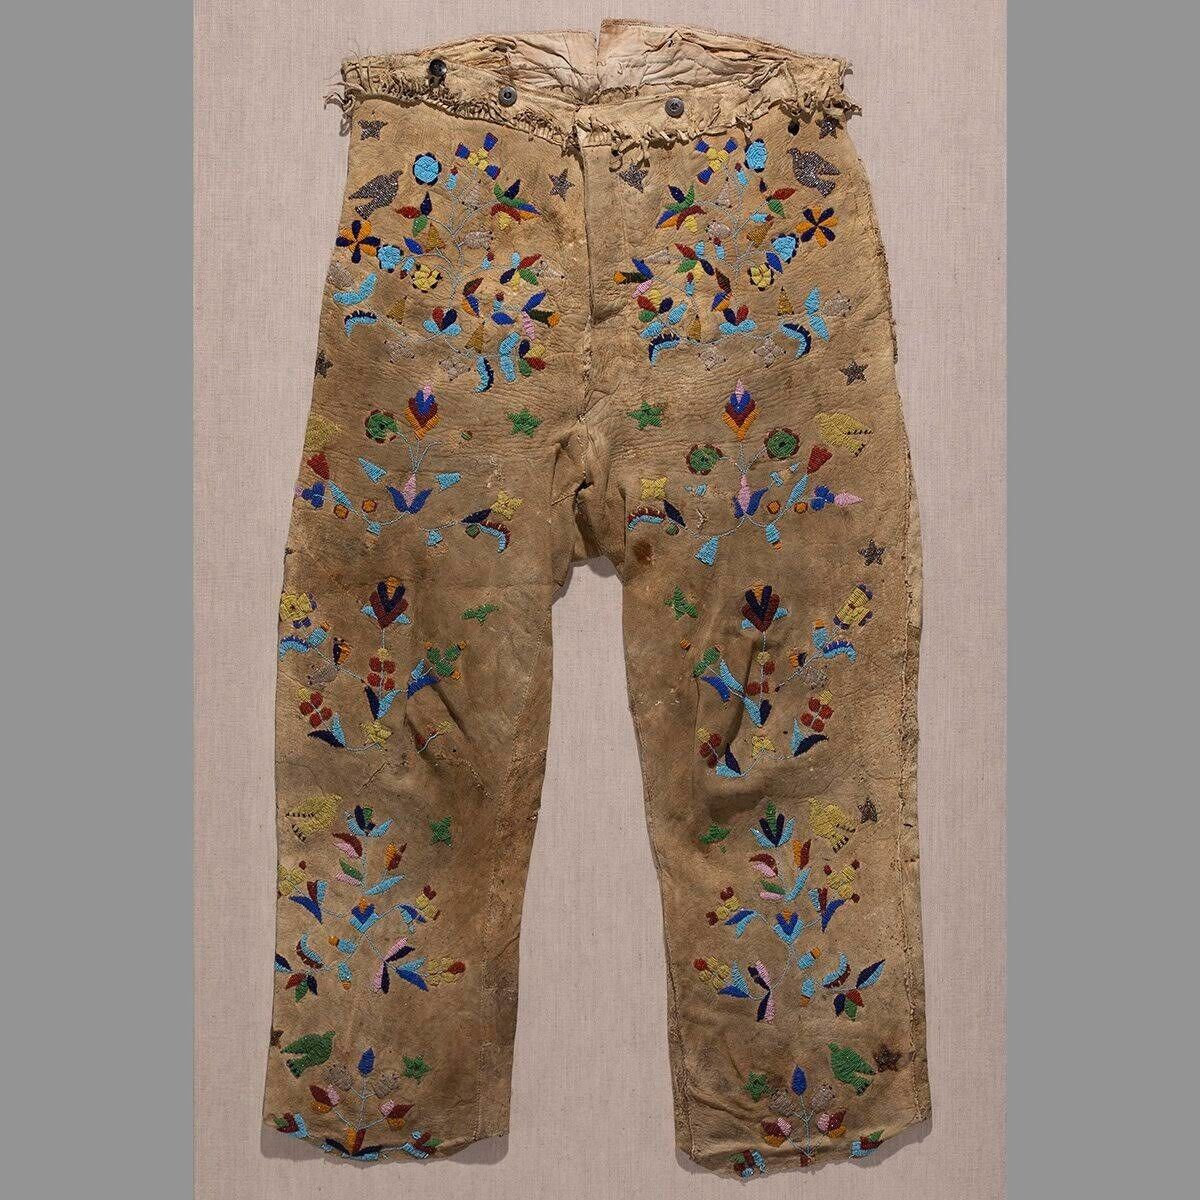 STUNNING PAIR OF 1890’S SANTEE SIOUX TROUSERS -MUSEUM MOUNT FRESH TO THE MARKET